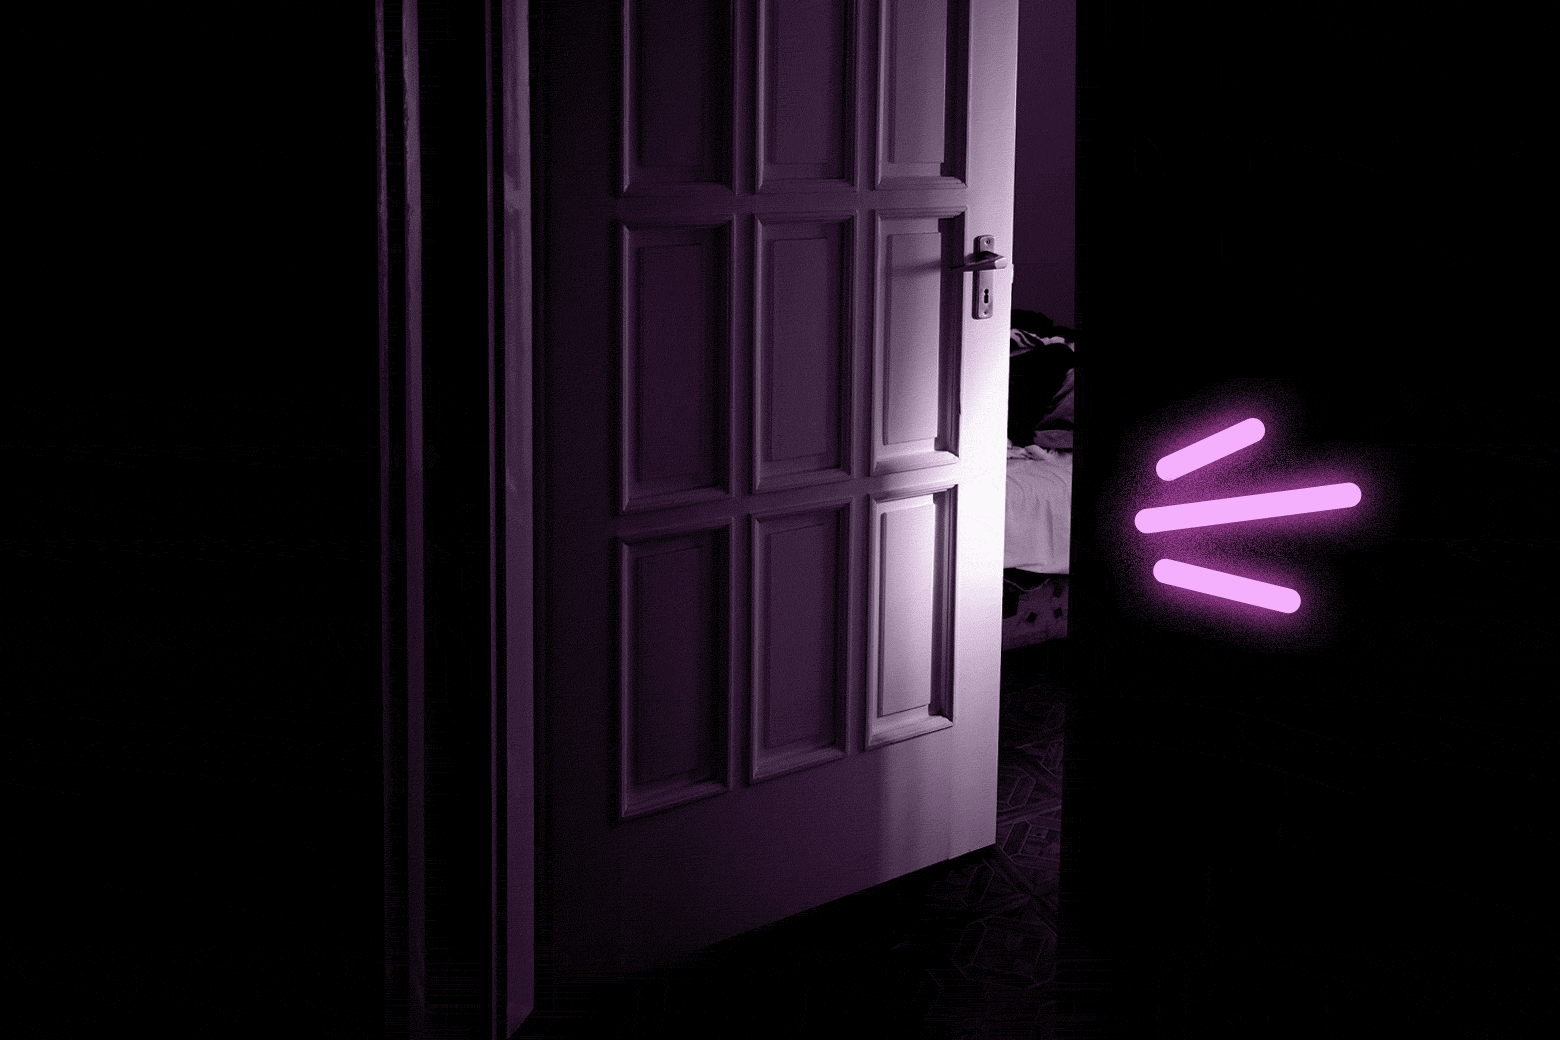 A door open a crack with neon lines indicating sound coming out.